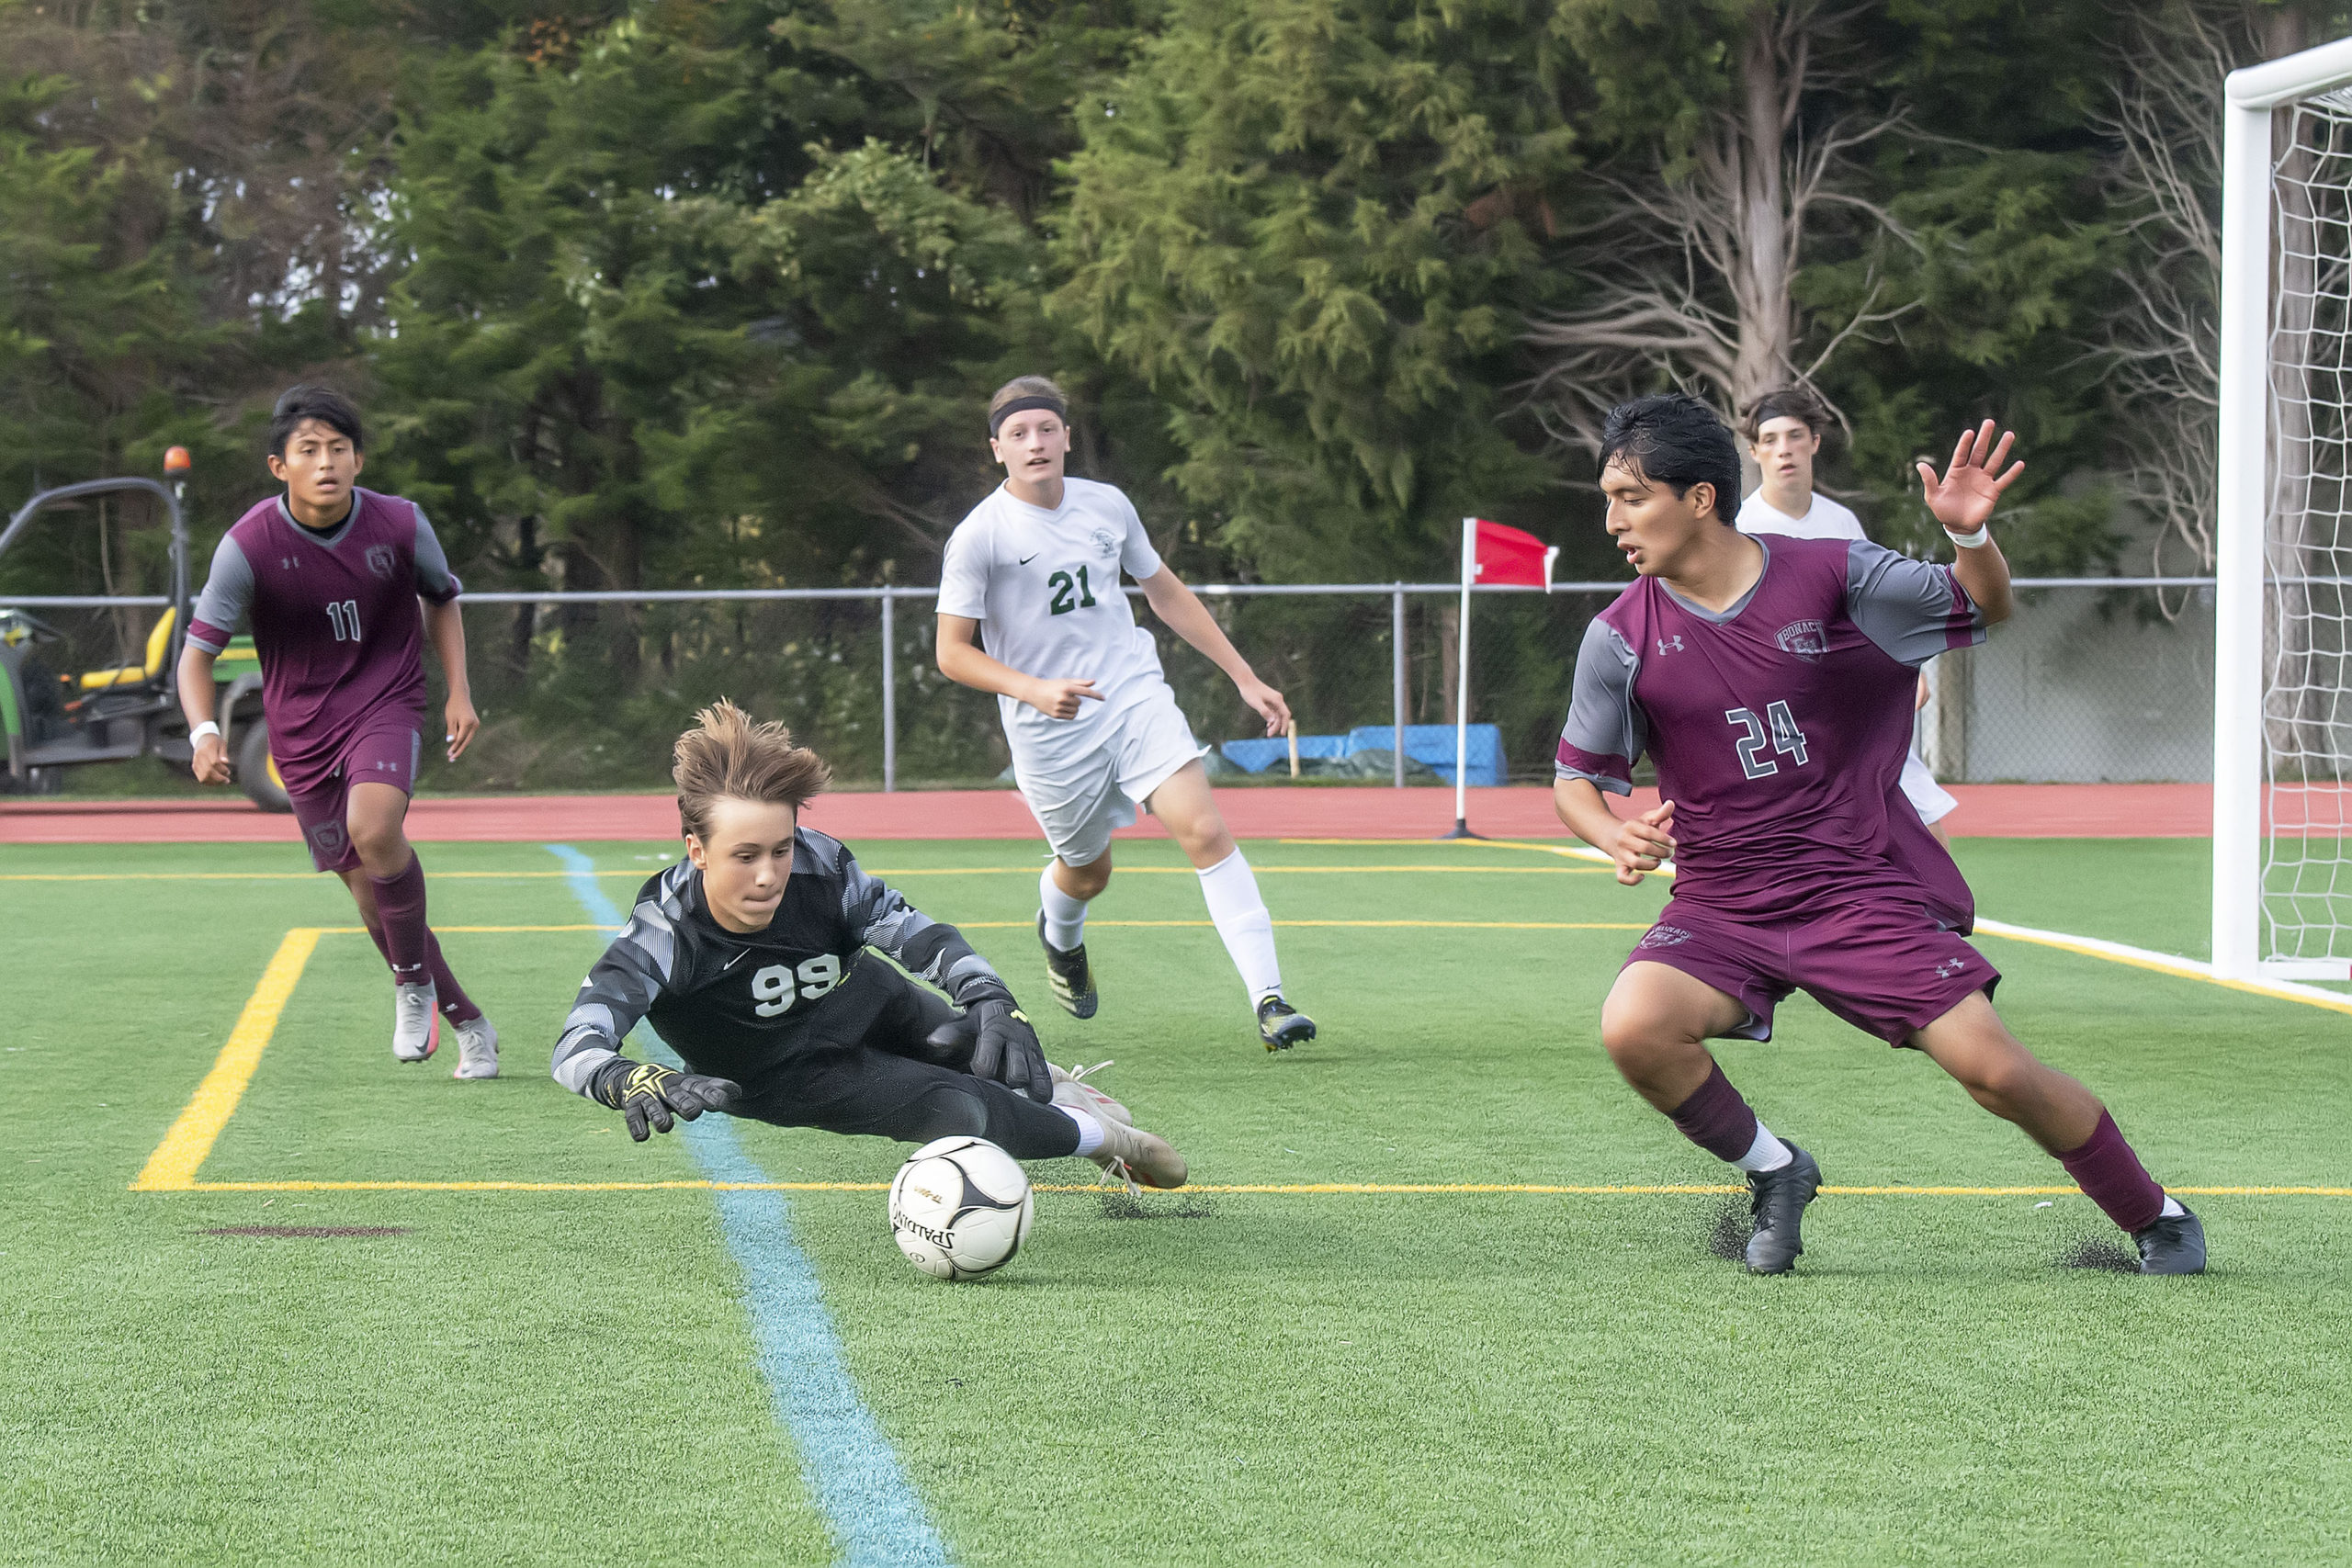 East Hampton's Gary Gutama tries to capitalize on a loose ball in front of the Harborfields goal.